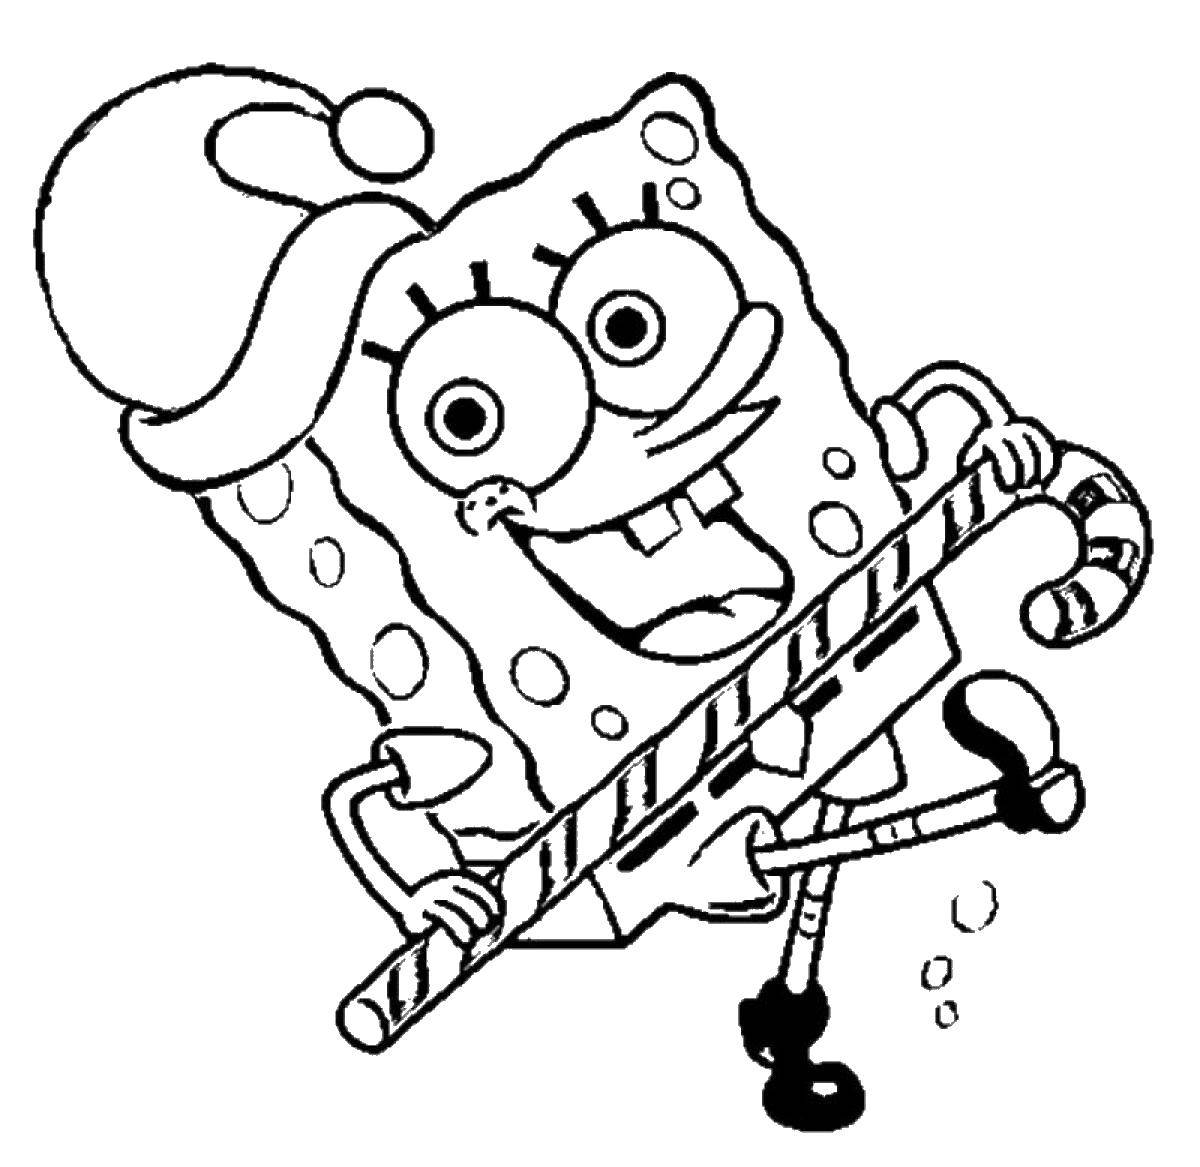 Coloring Spongebob with candy. Category Christmas. Tags:  span Bob, dome, candy.